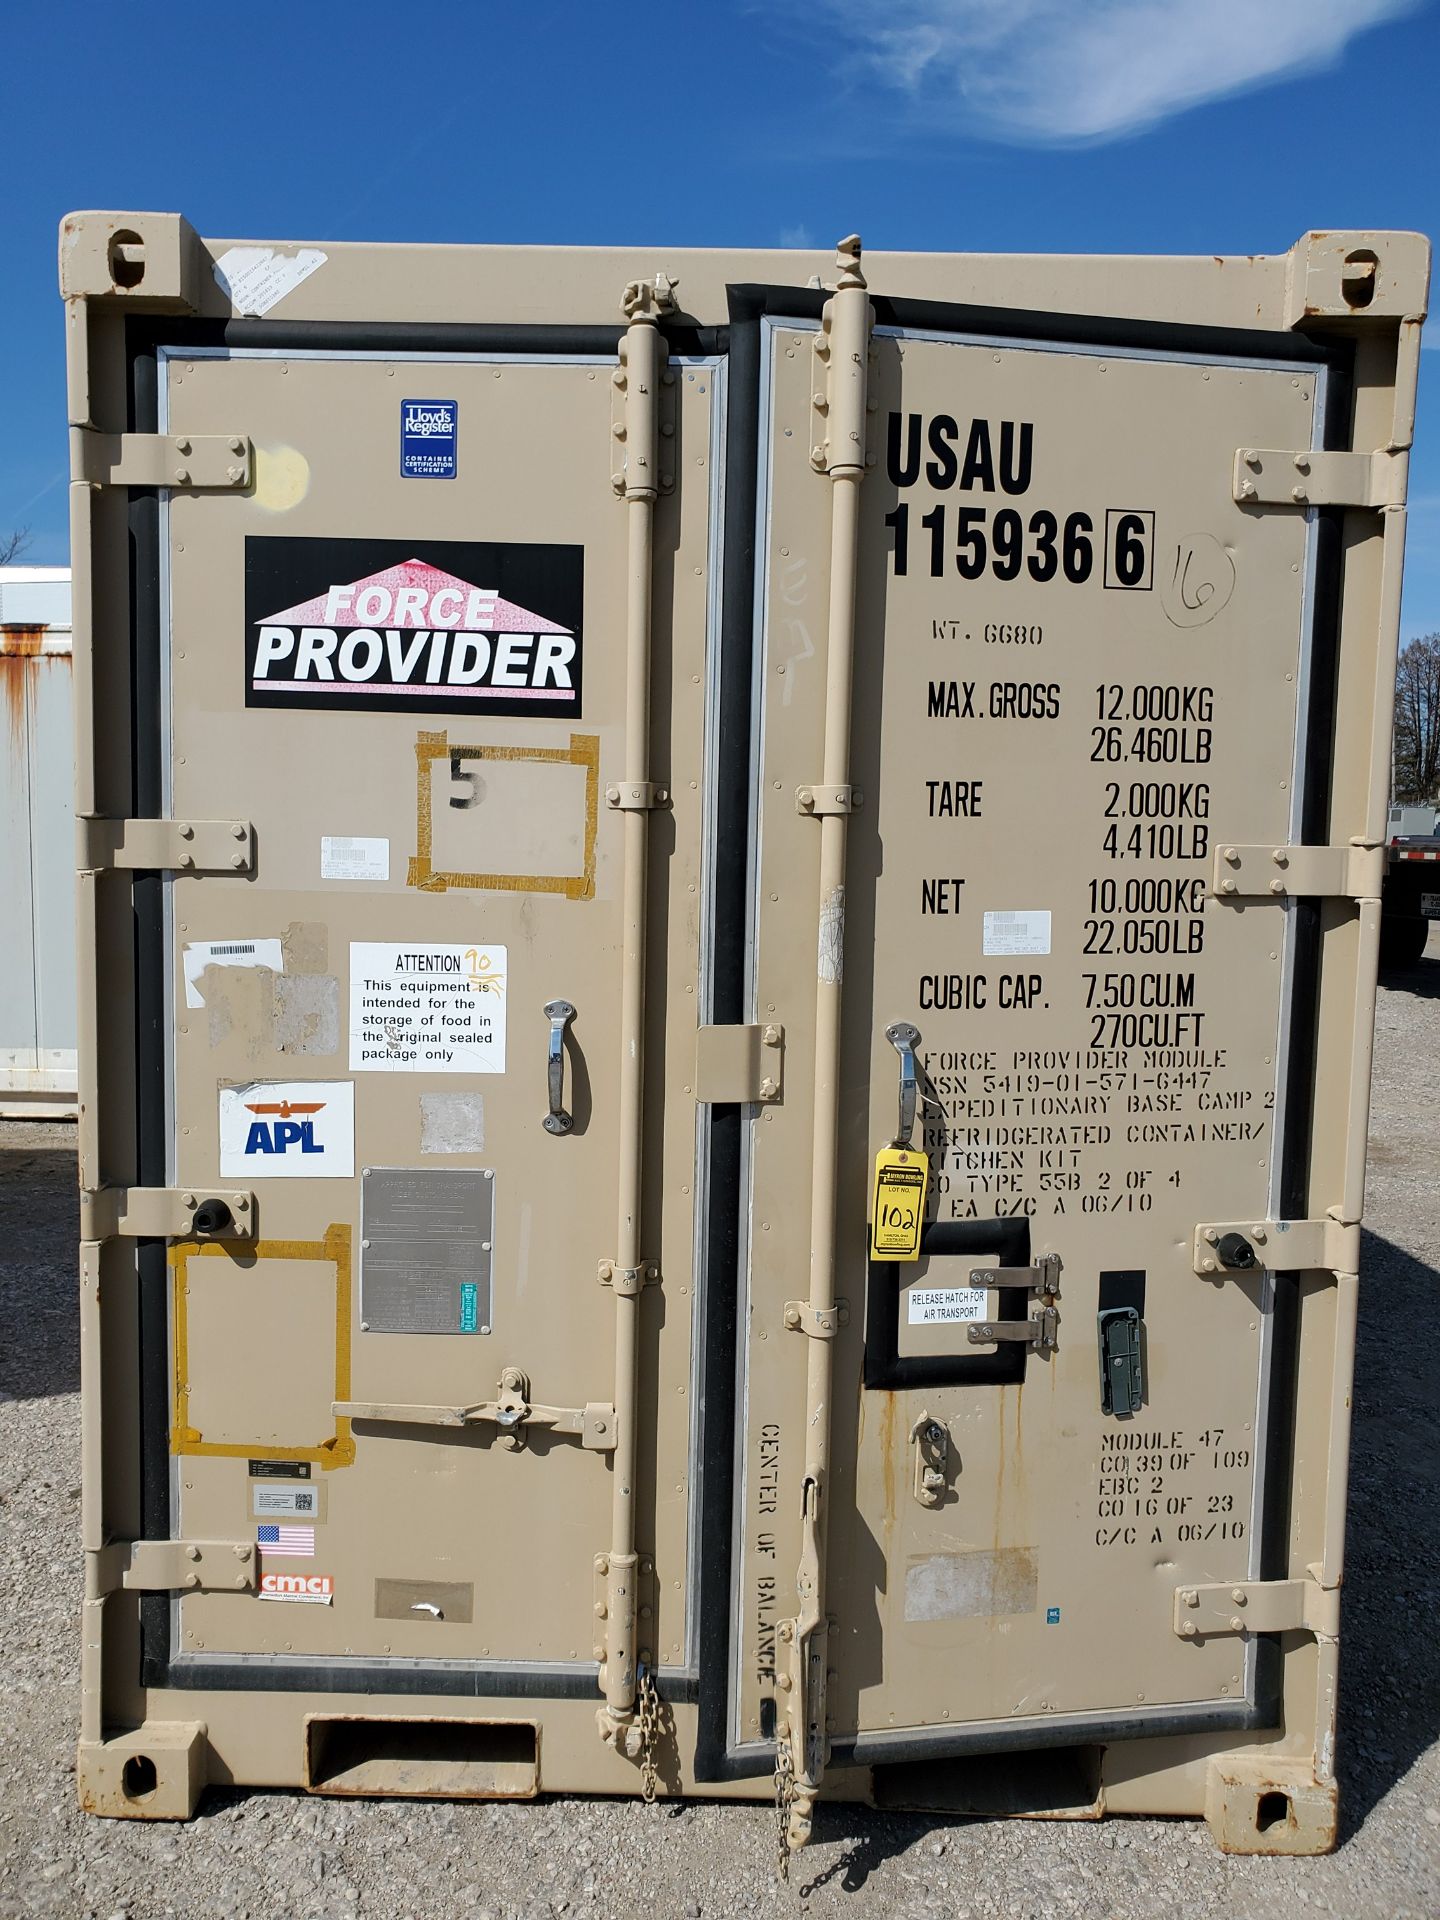 2009 FORCE PROVIDER REFRIGERATED CONTAINER 8' X 8' X 6.5', LESS THAN 200 HOURS - Image 2 of 11